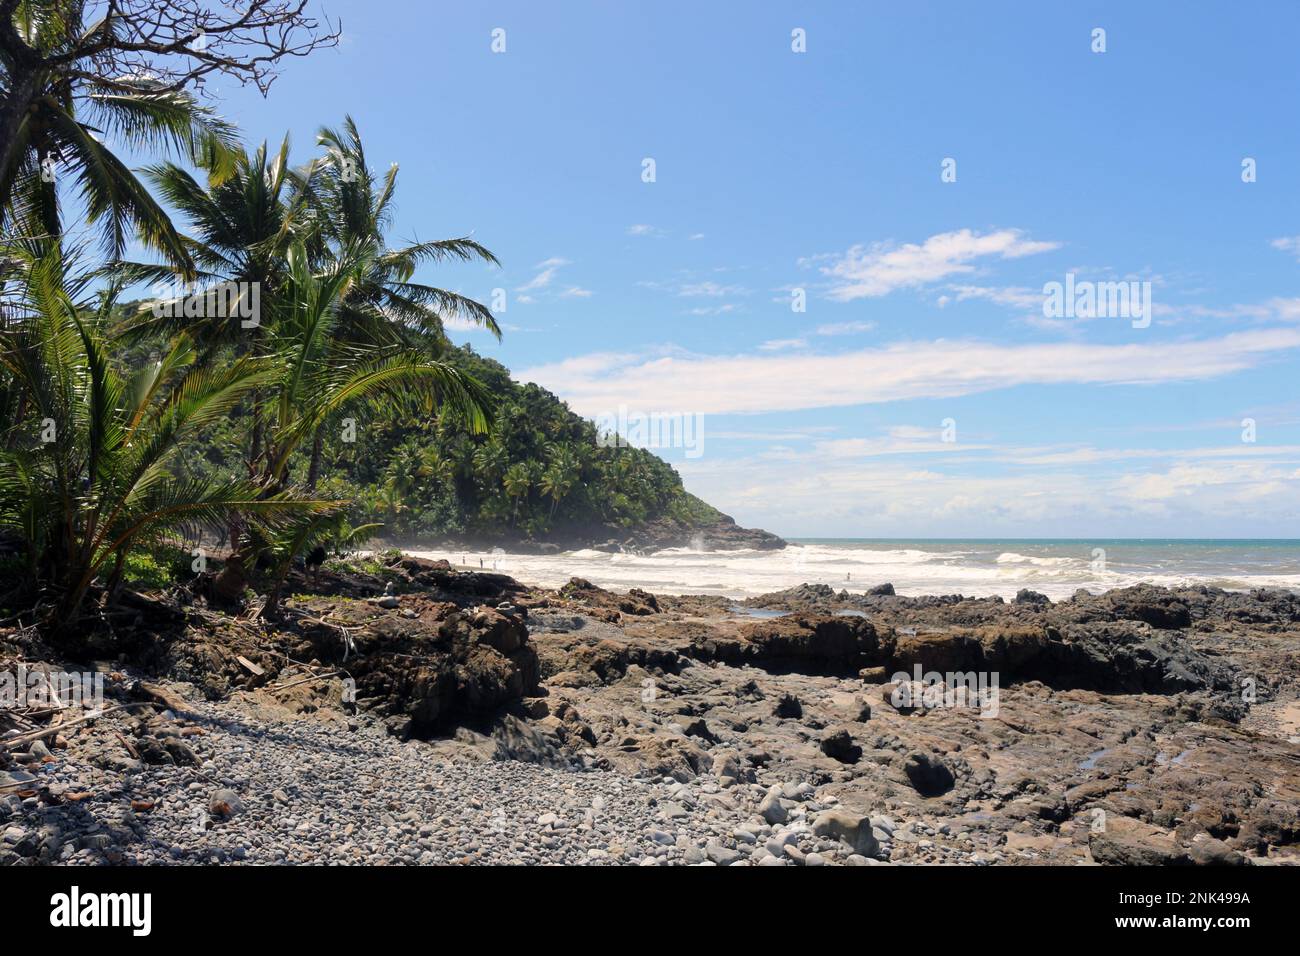 Wonderful landscapes of unspoilt beauty on the beaches of Itacaré, in the state of Bahia. Stock Photo